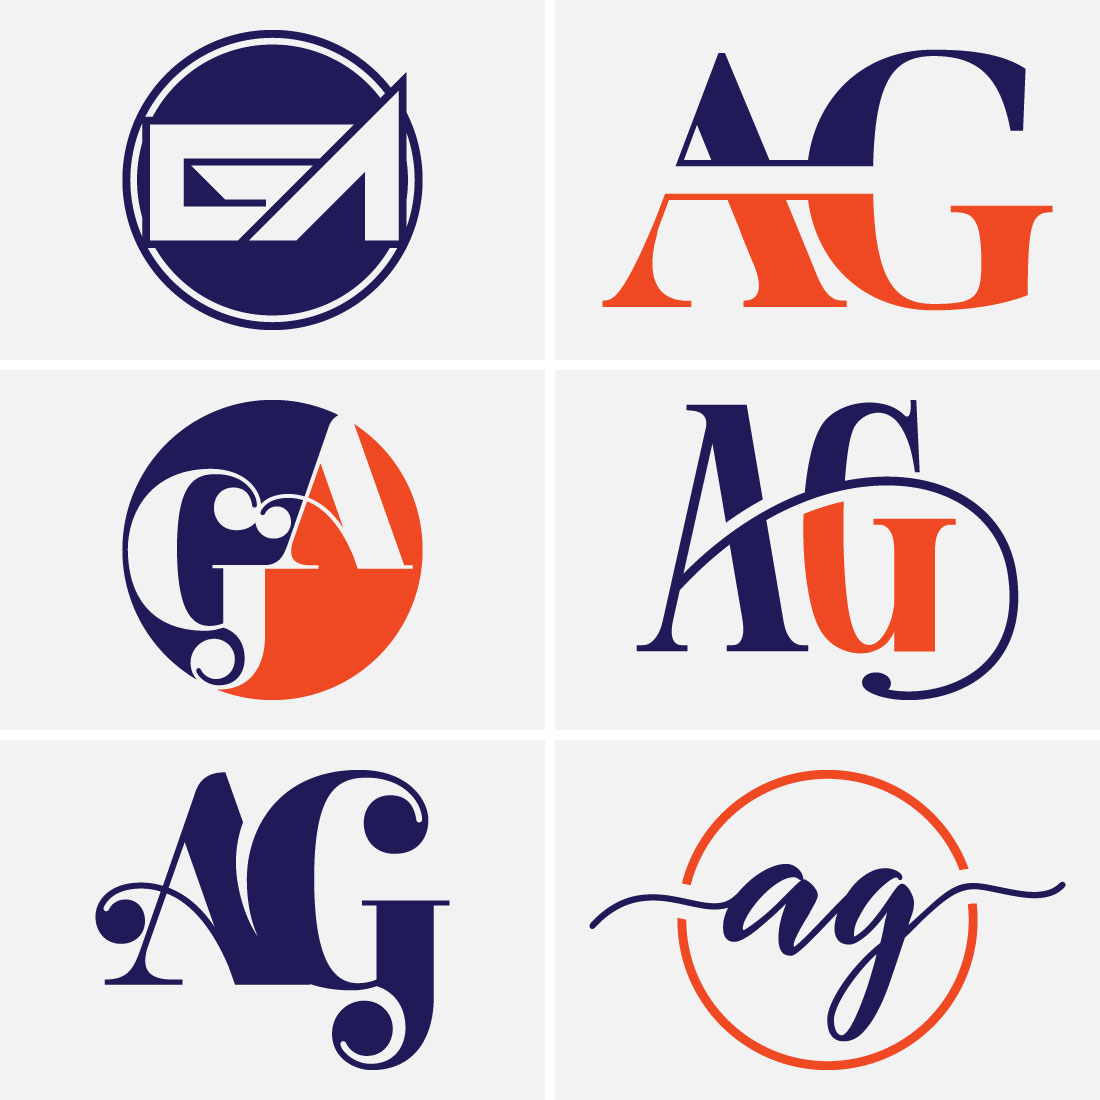 A-G Initial Letter Logo Design image preview.